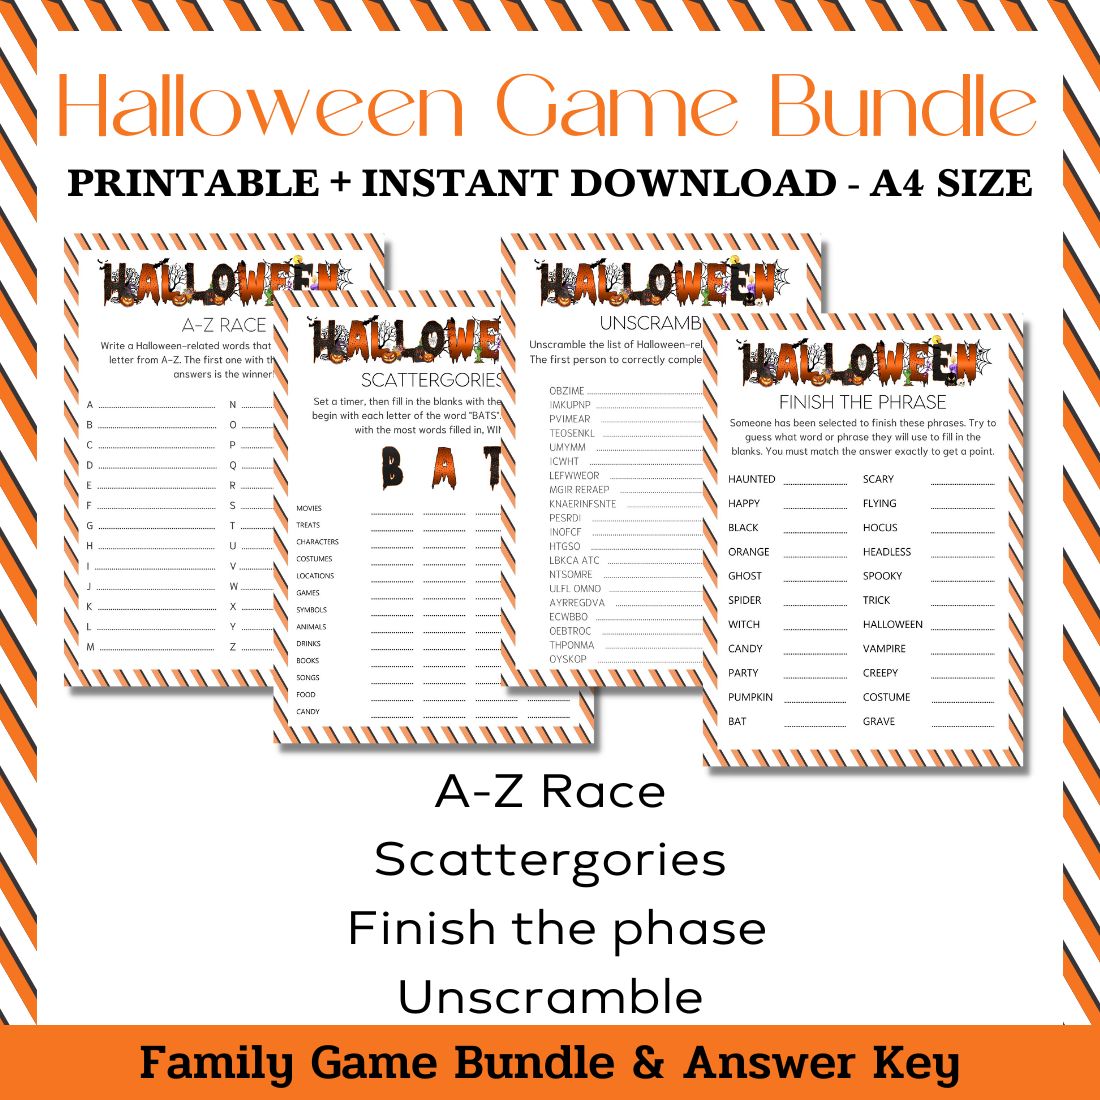 Halloween Party game bundle - 20 Games preview image.